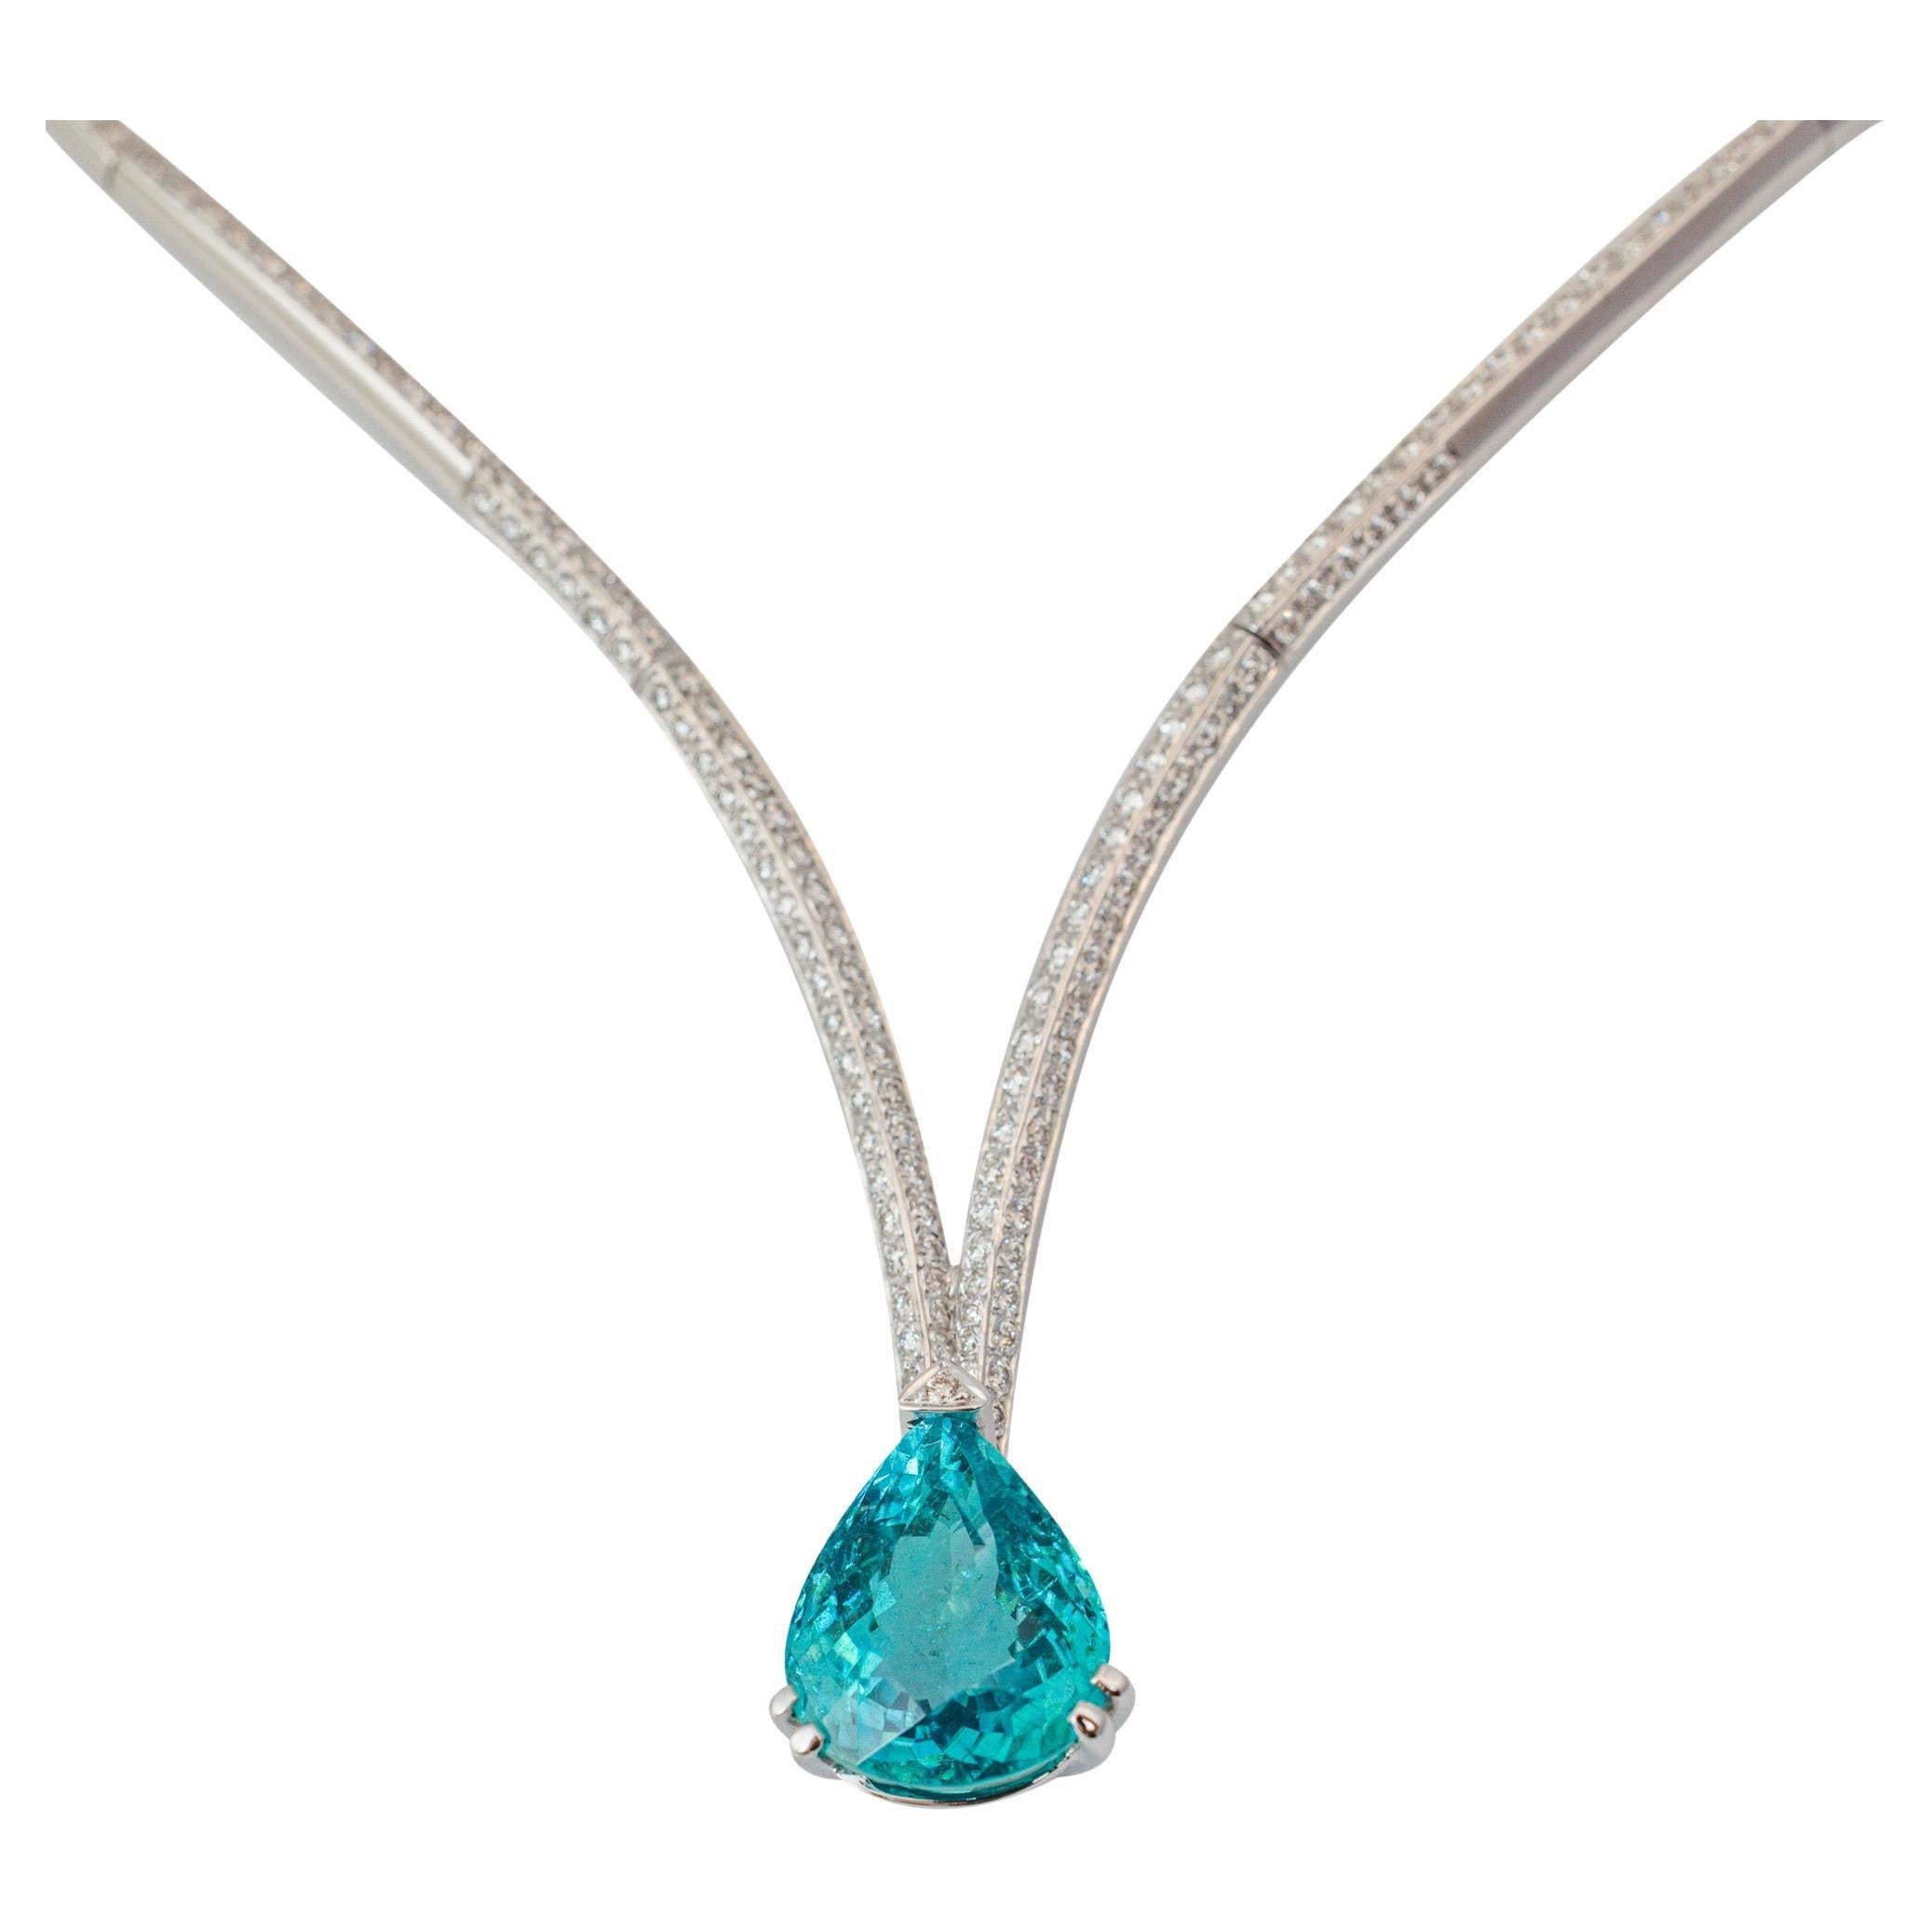 "Costis" Four Claw Necklace, 7.23 Carats African Paraiba Tourmaline and Diamonds